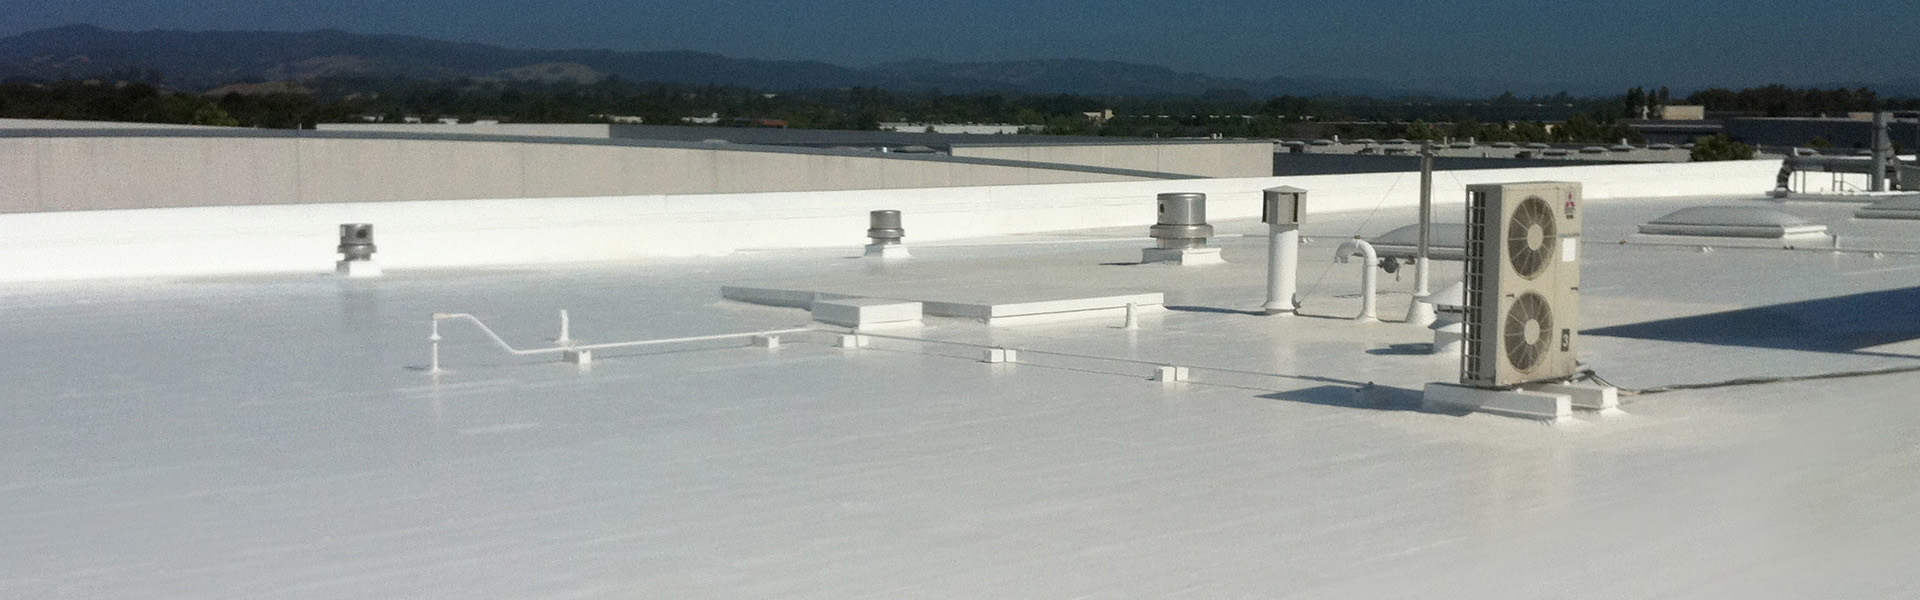 WE SPECIALIZE IN SPRAY FOAM ROOFING AND COOL ROOF COATINGS FOR COMMERCIAL AND INDUSTRIAL BUILDINGS